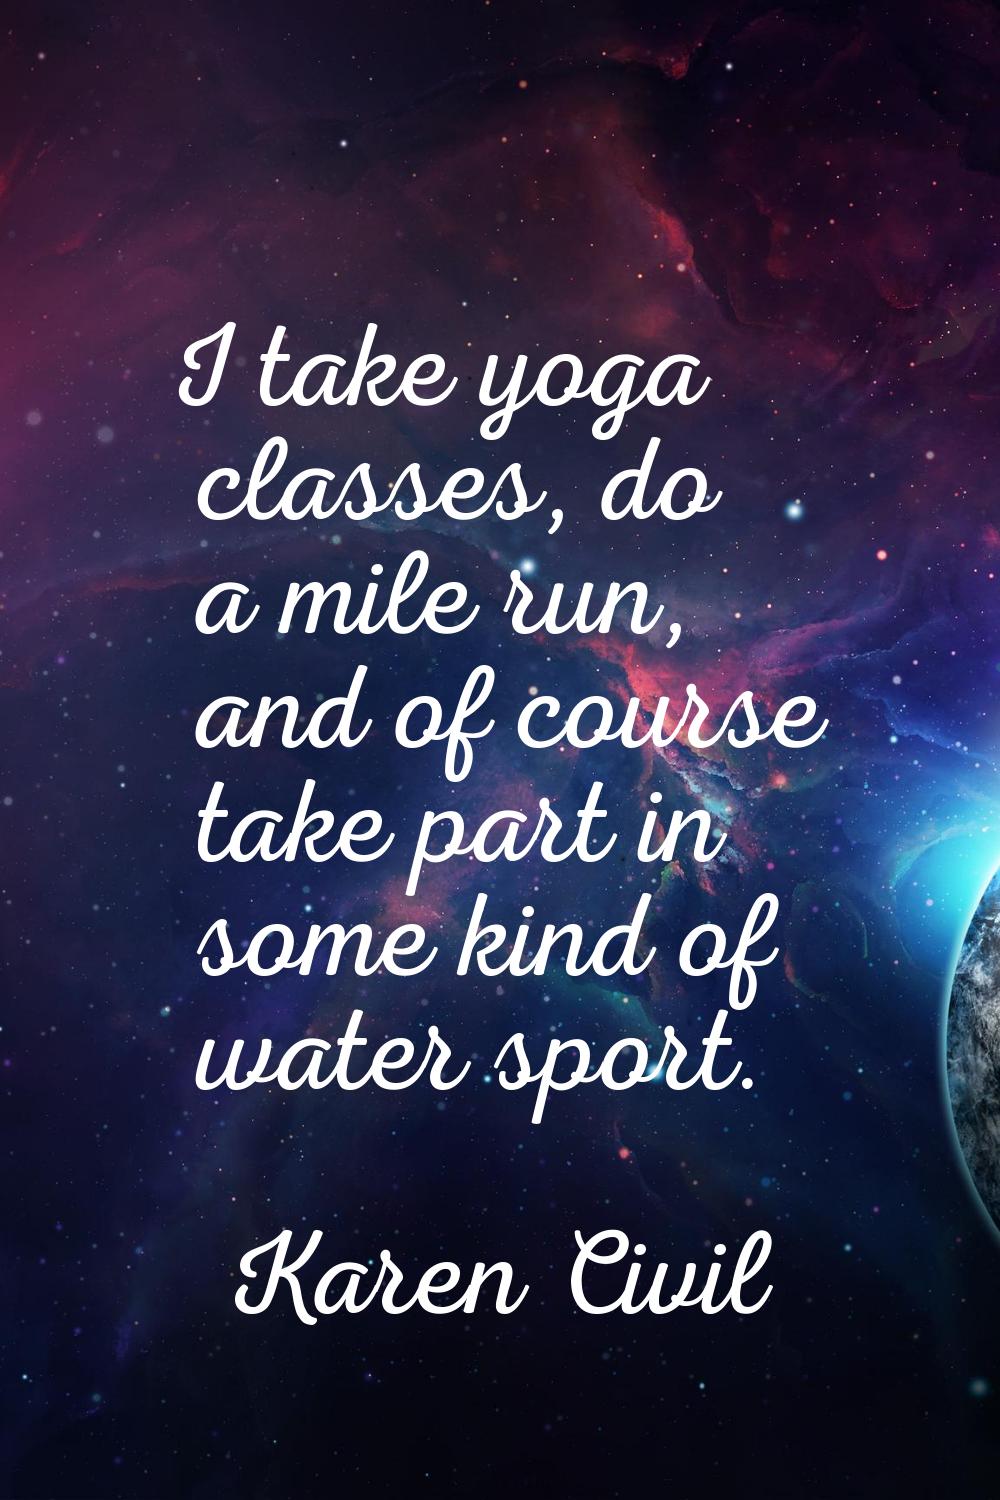 I take yoga classes, do a mile run, and of course take part in some kind of water sport.